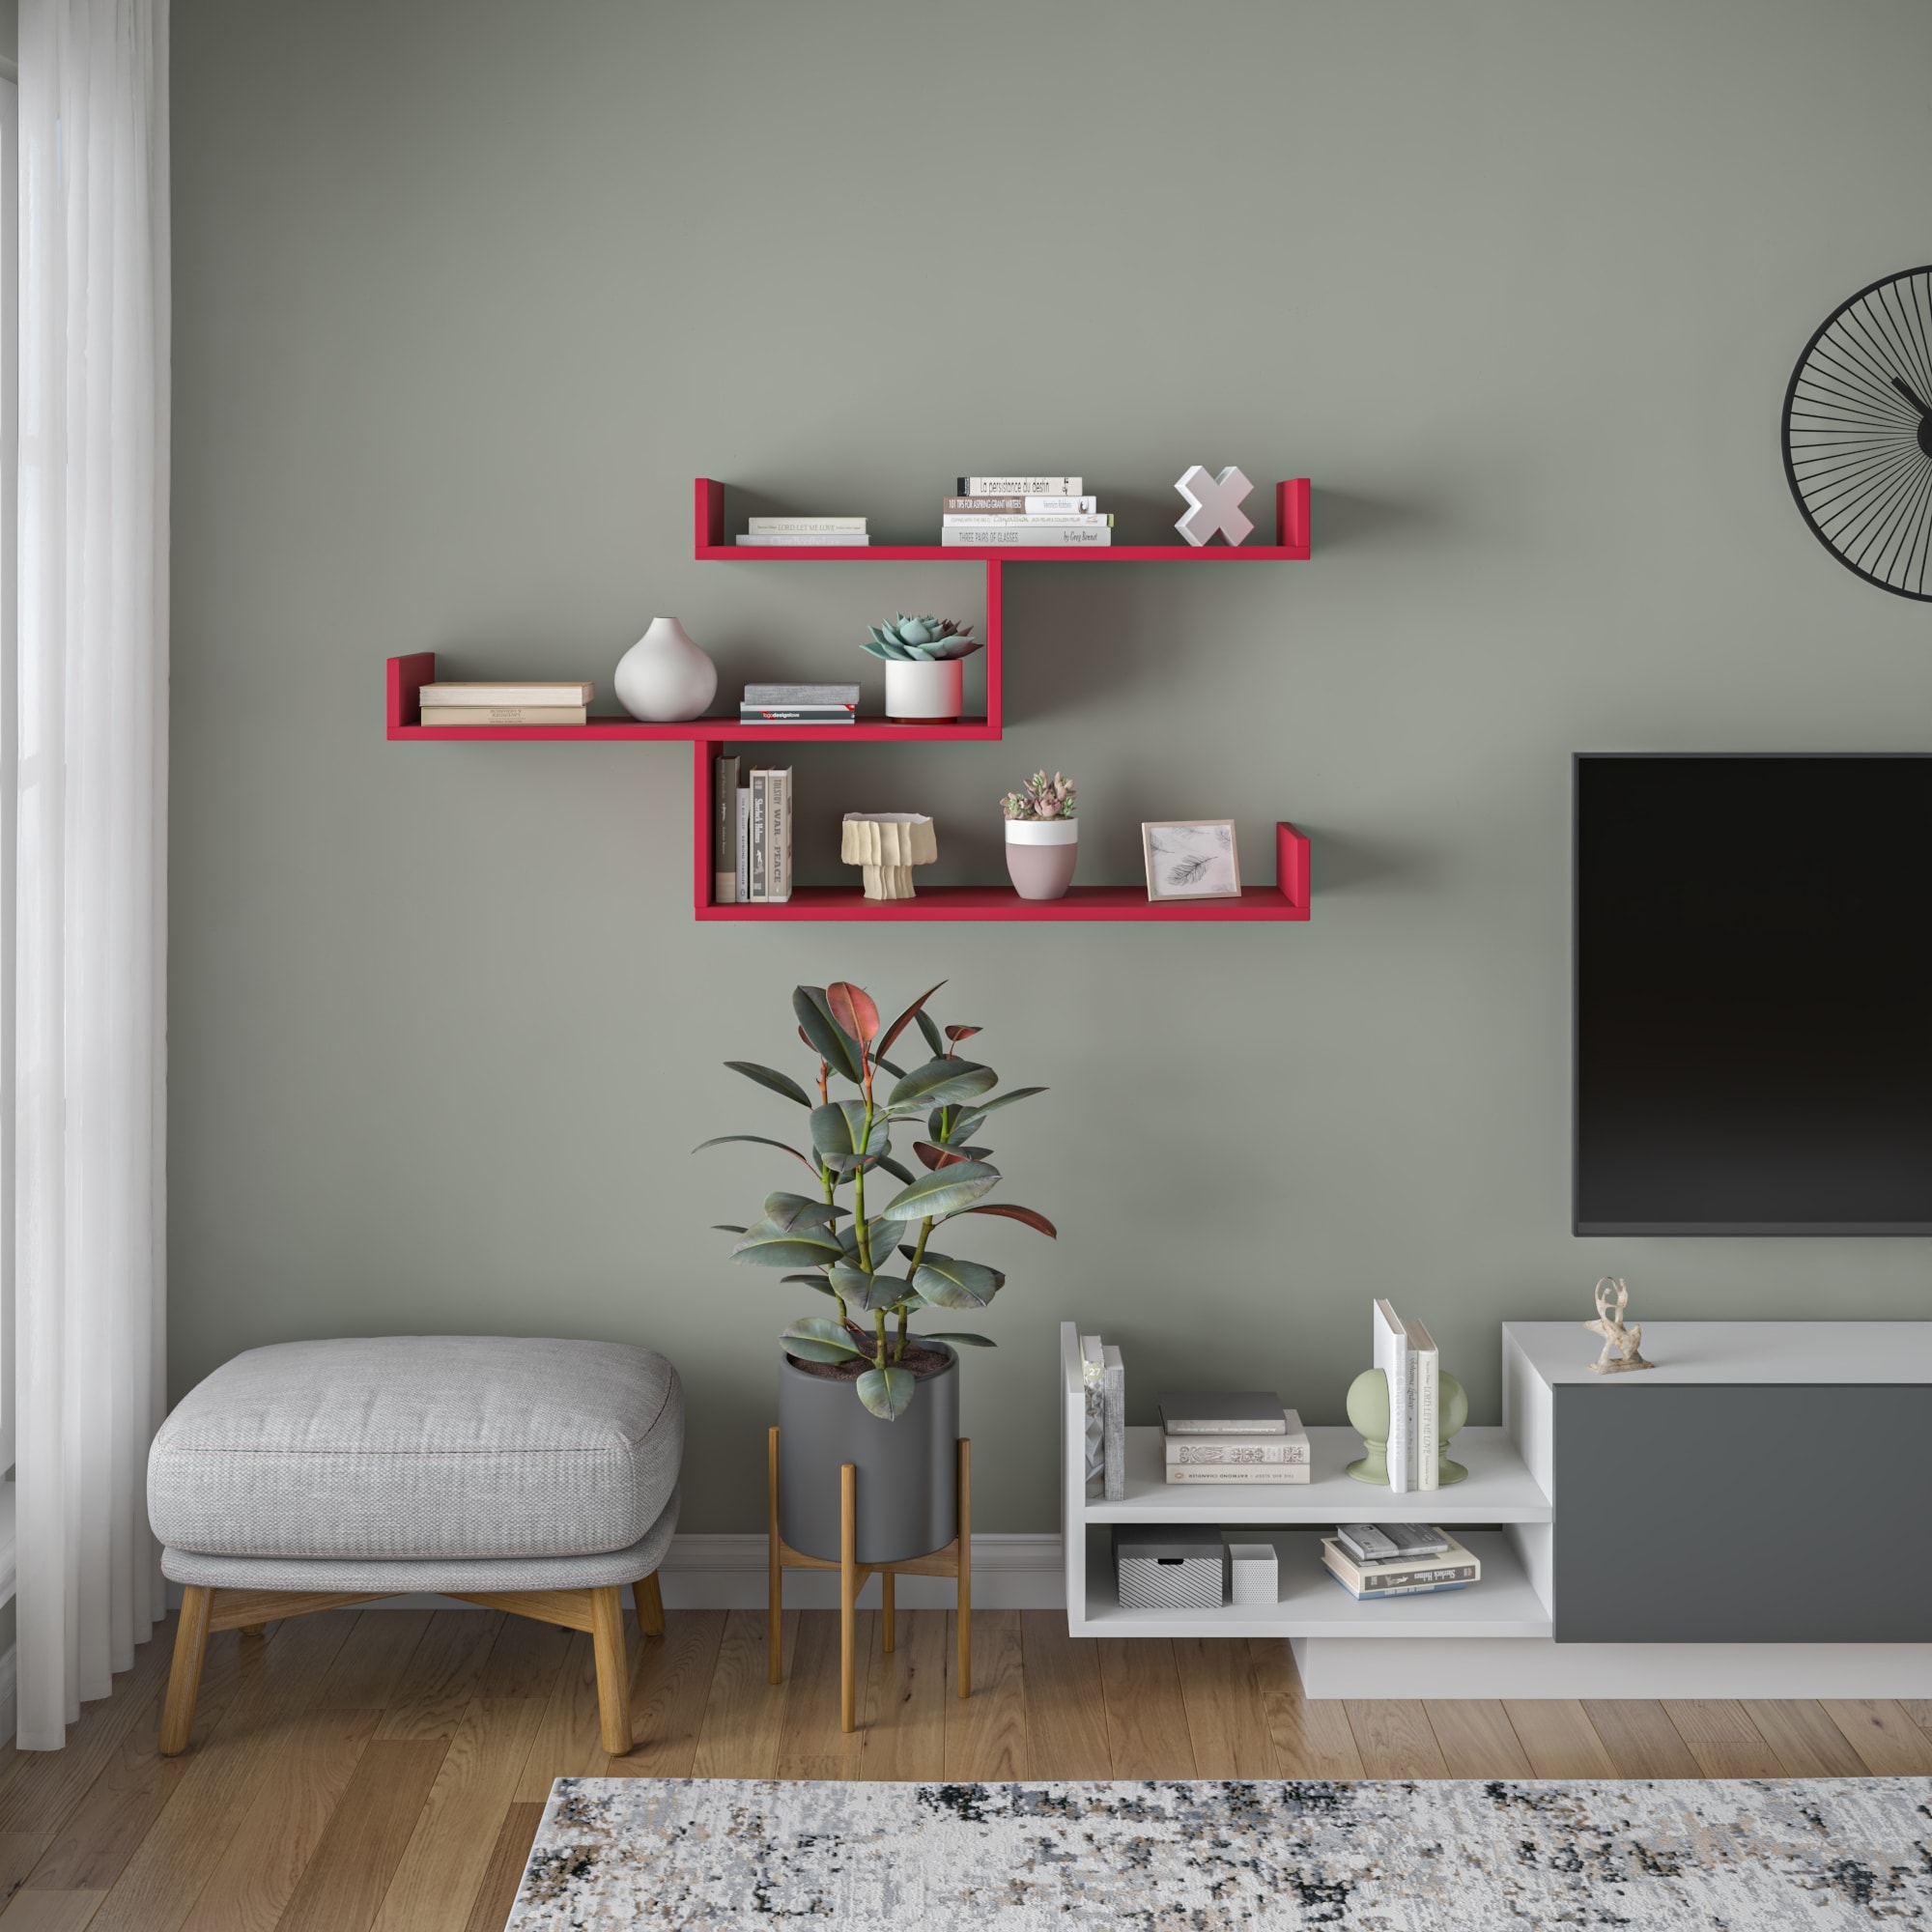 https://ak1.ostkcdn.com/images/products/is/images/direct/735716d3be1ace3ac759058f7af86cec984043bc/Wilton-Modern-Wall-Shelf.jpg